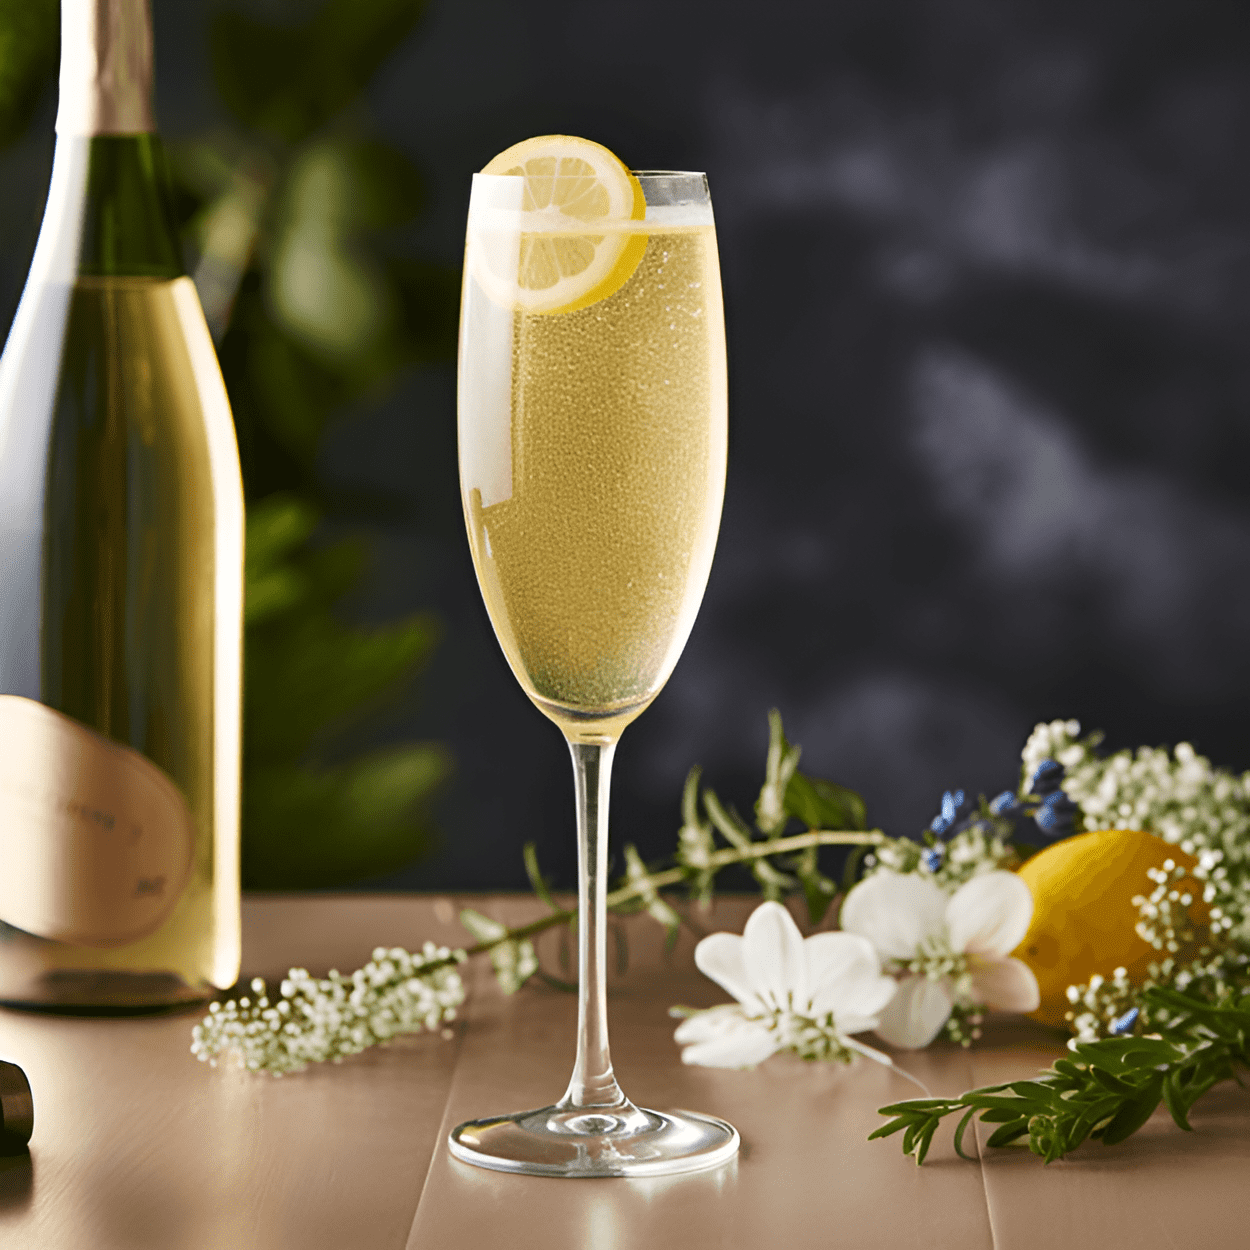 Elderflower French 75 Cocktail Recipe - The Elderflower French 75 is a delightful blend of sweet, sour, and floral notes. The elderflower liqueur adds a delicate sweetness and floral aroma, which is balanced by the tartness of the lemon juice. The champagne gives it a bubbly effervescence and a dry finish, while the gin provides a strong, juniper-forward base.